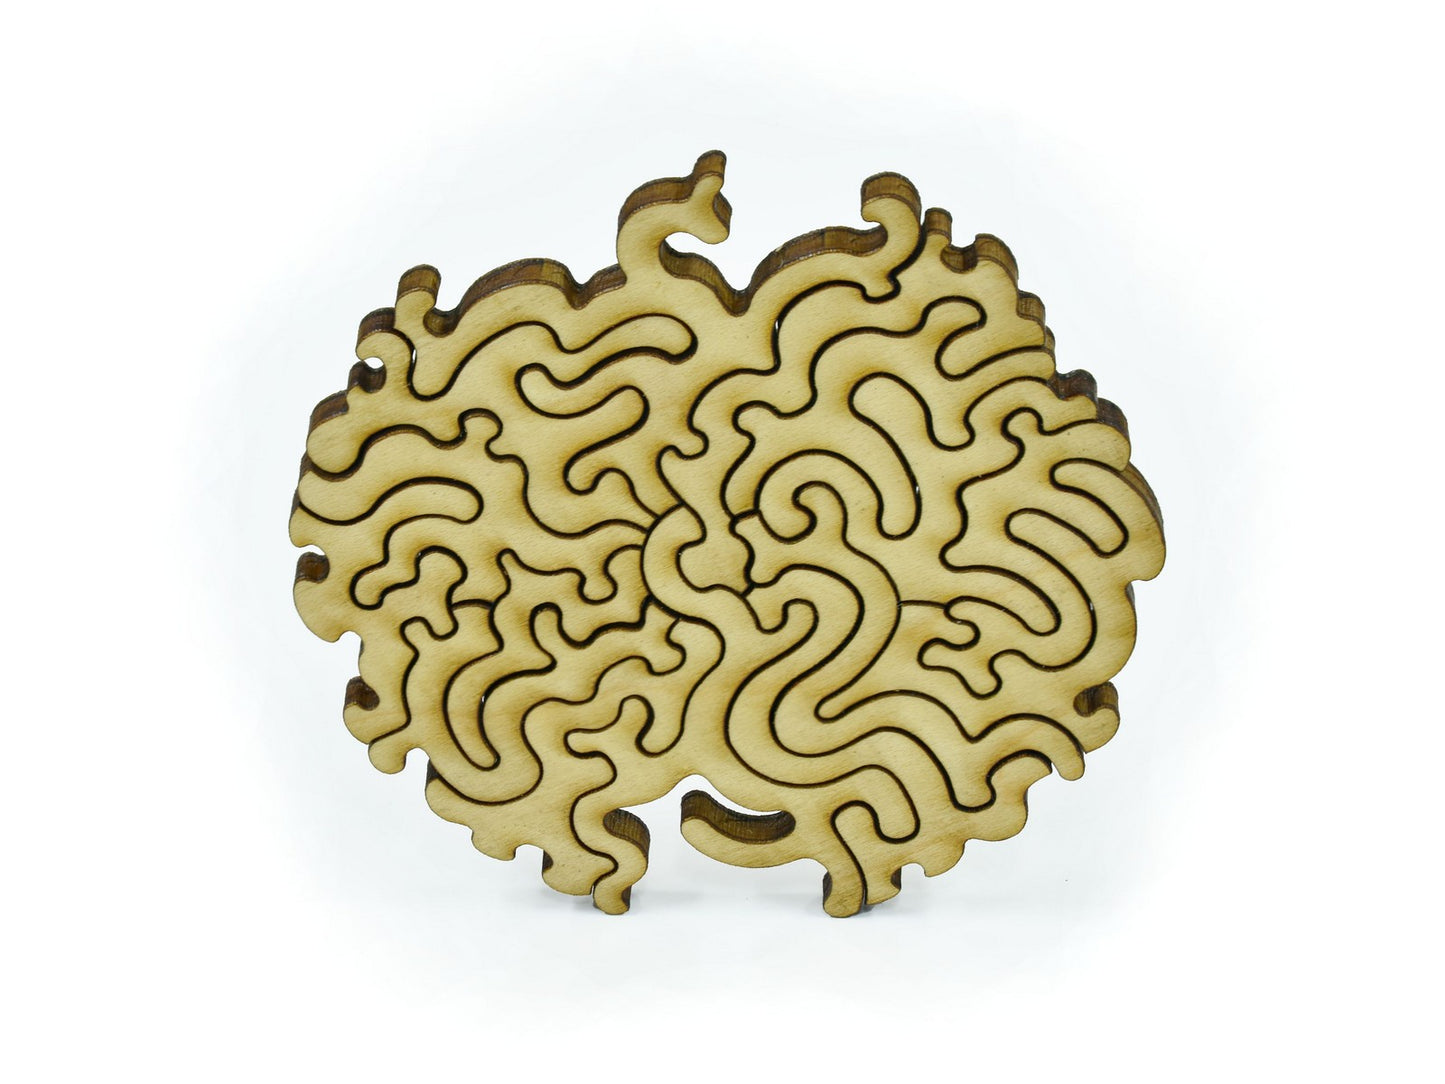 A closeup of pieces in the shape of a brain coral.